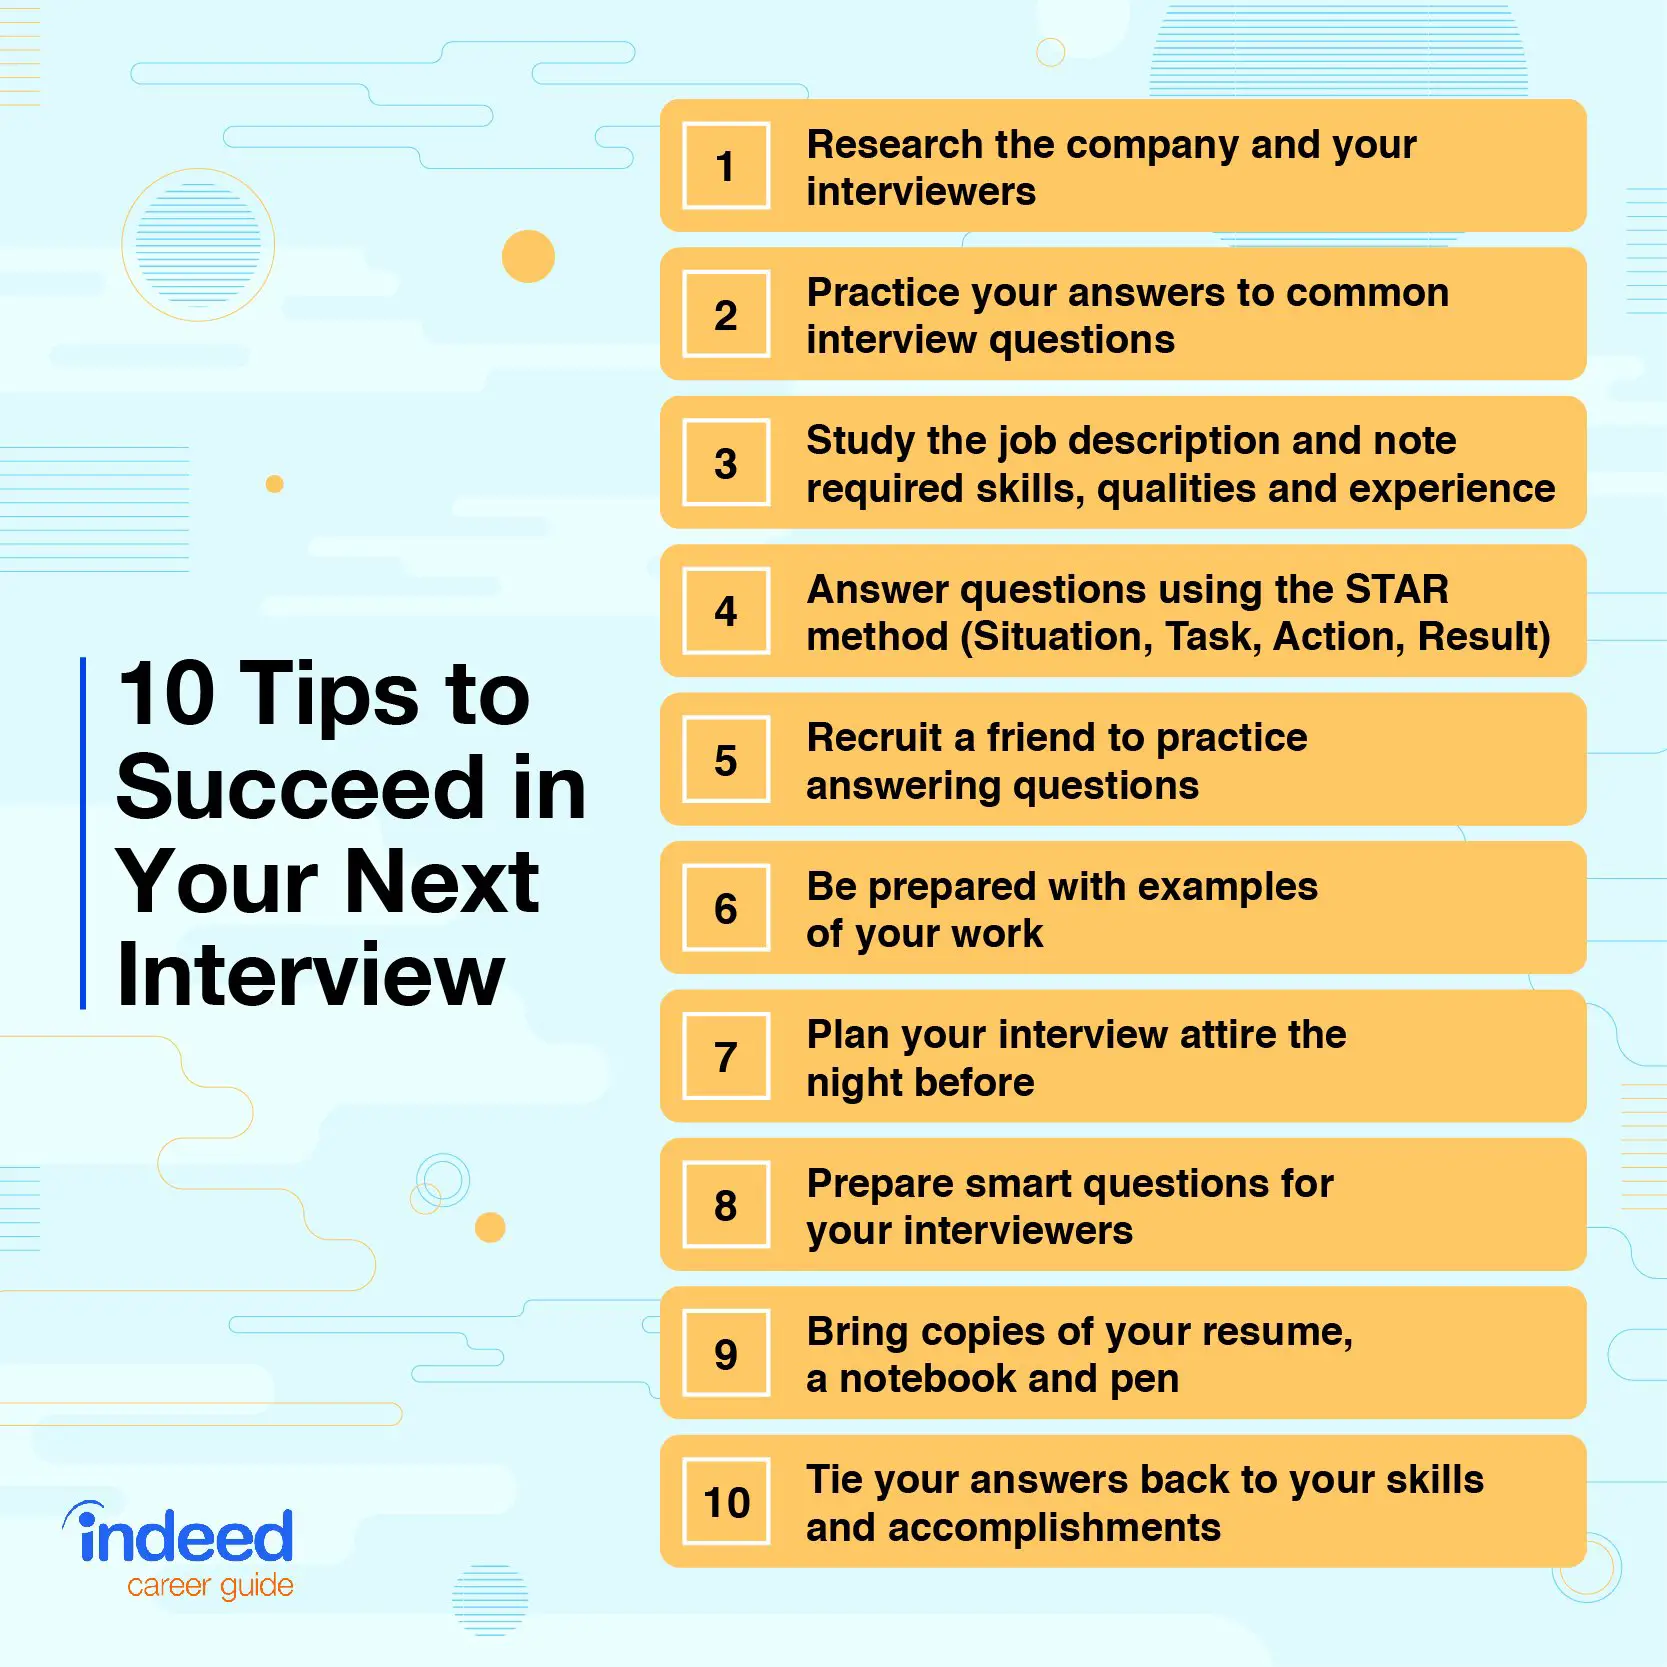 125 Common Interview Questions and Answers (With Tips)